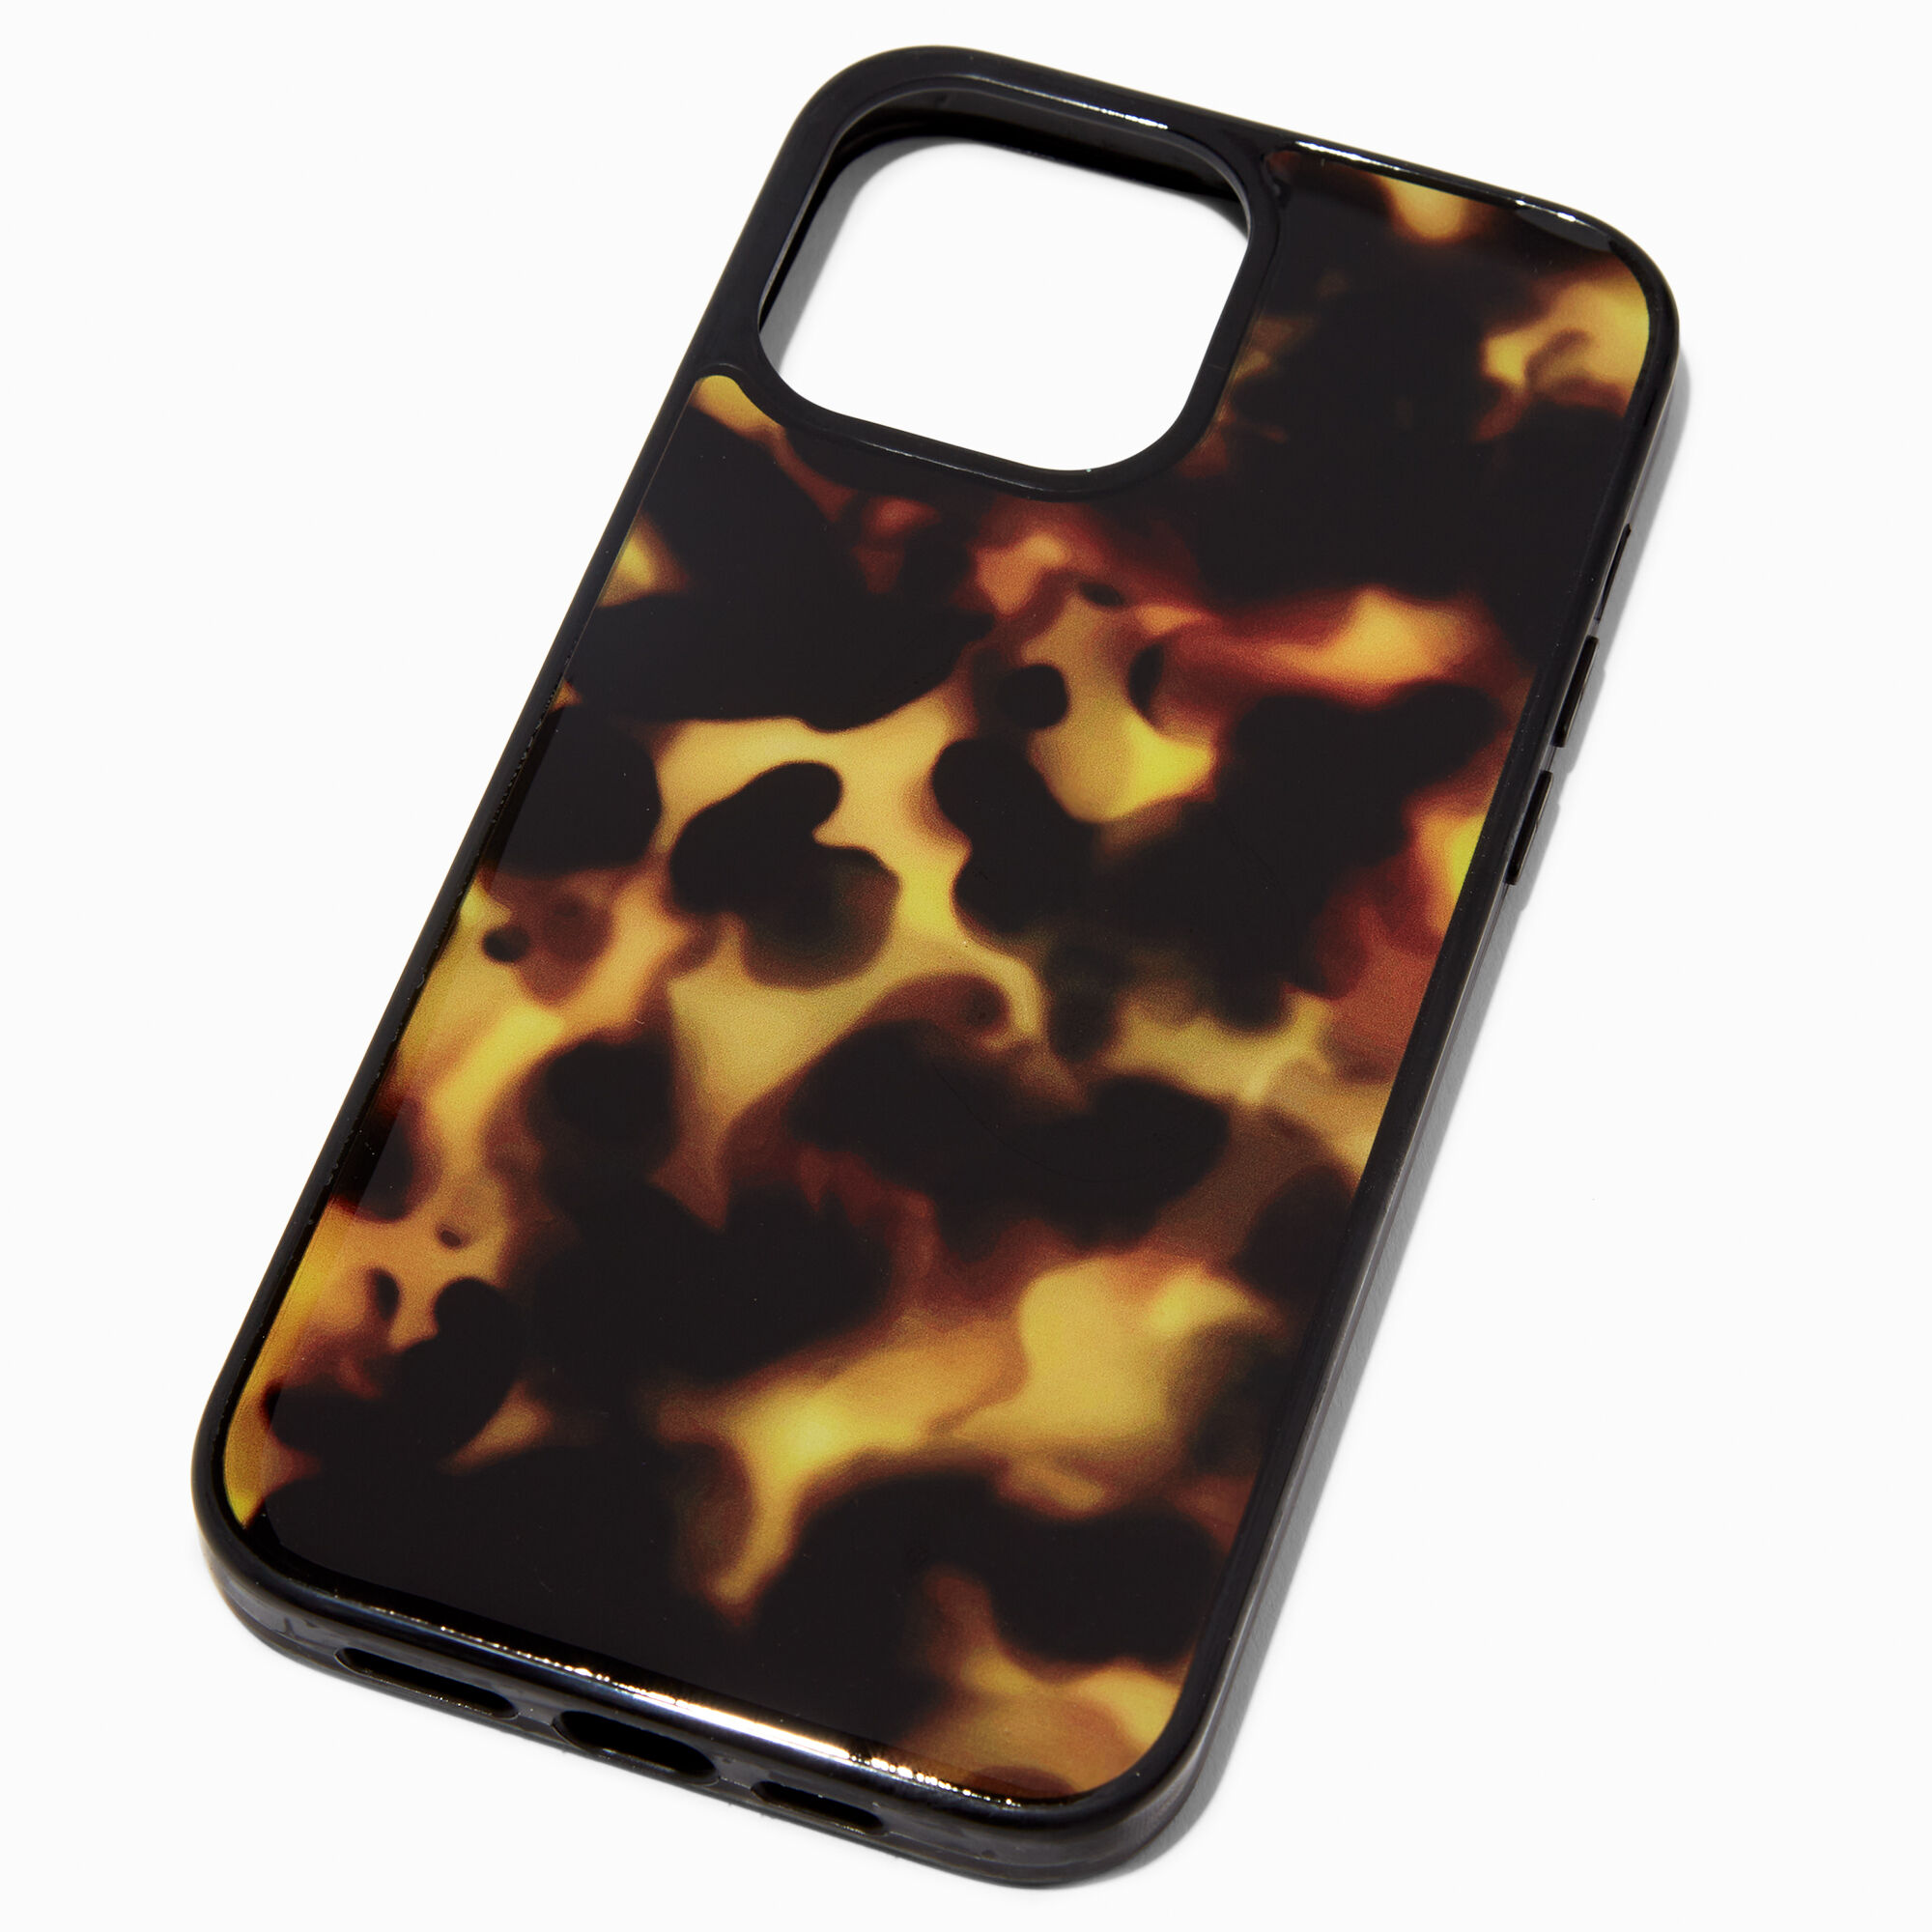 View Claires Tortoiseshell Protective Phone Case Fits Iphone 13 Pro Max information